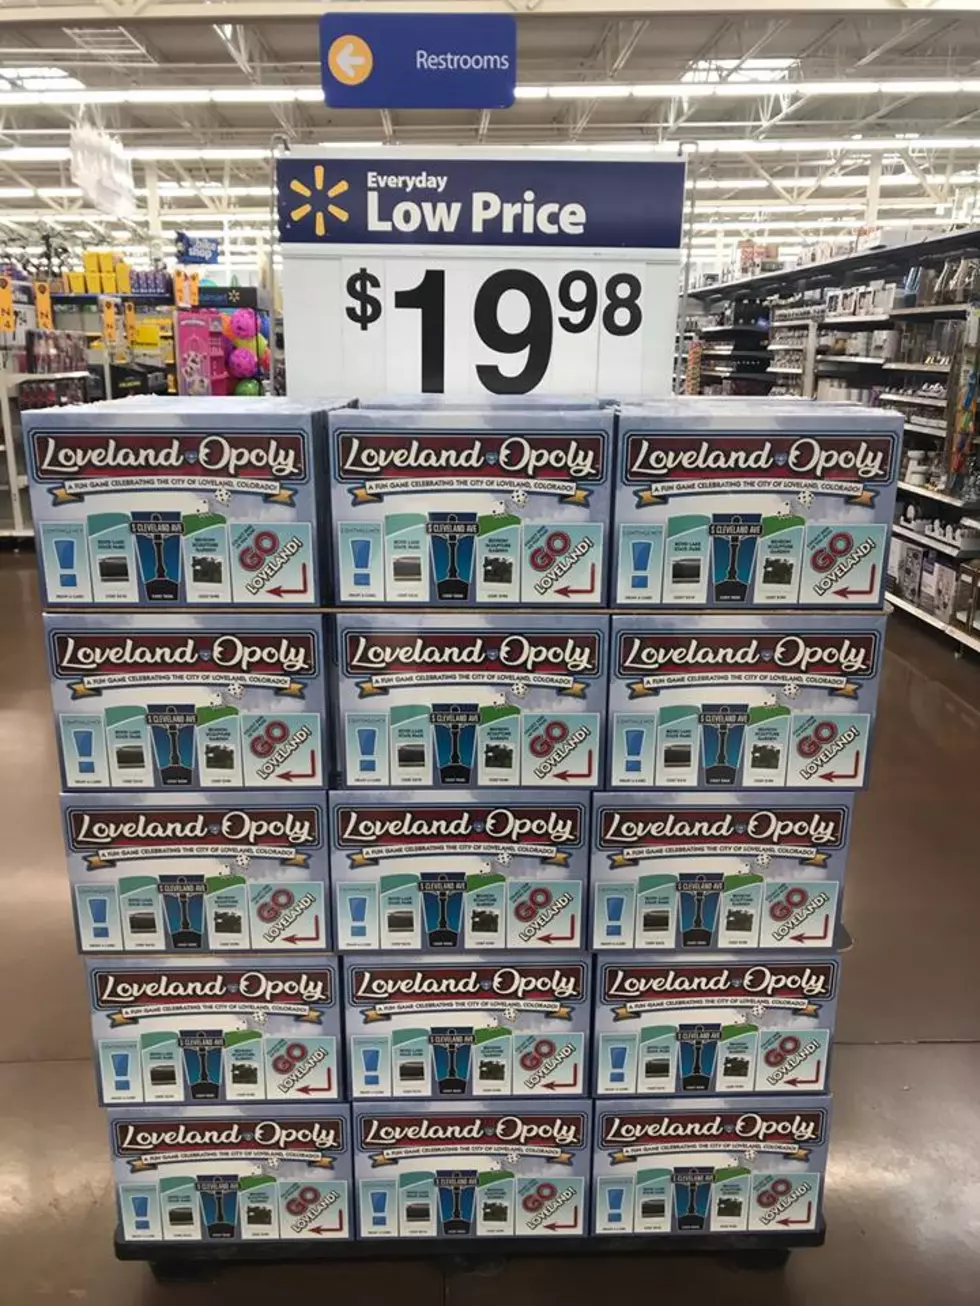 Loveland-Opoly Now Available At Walmart